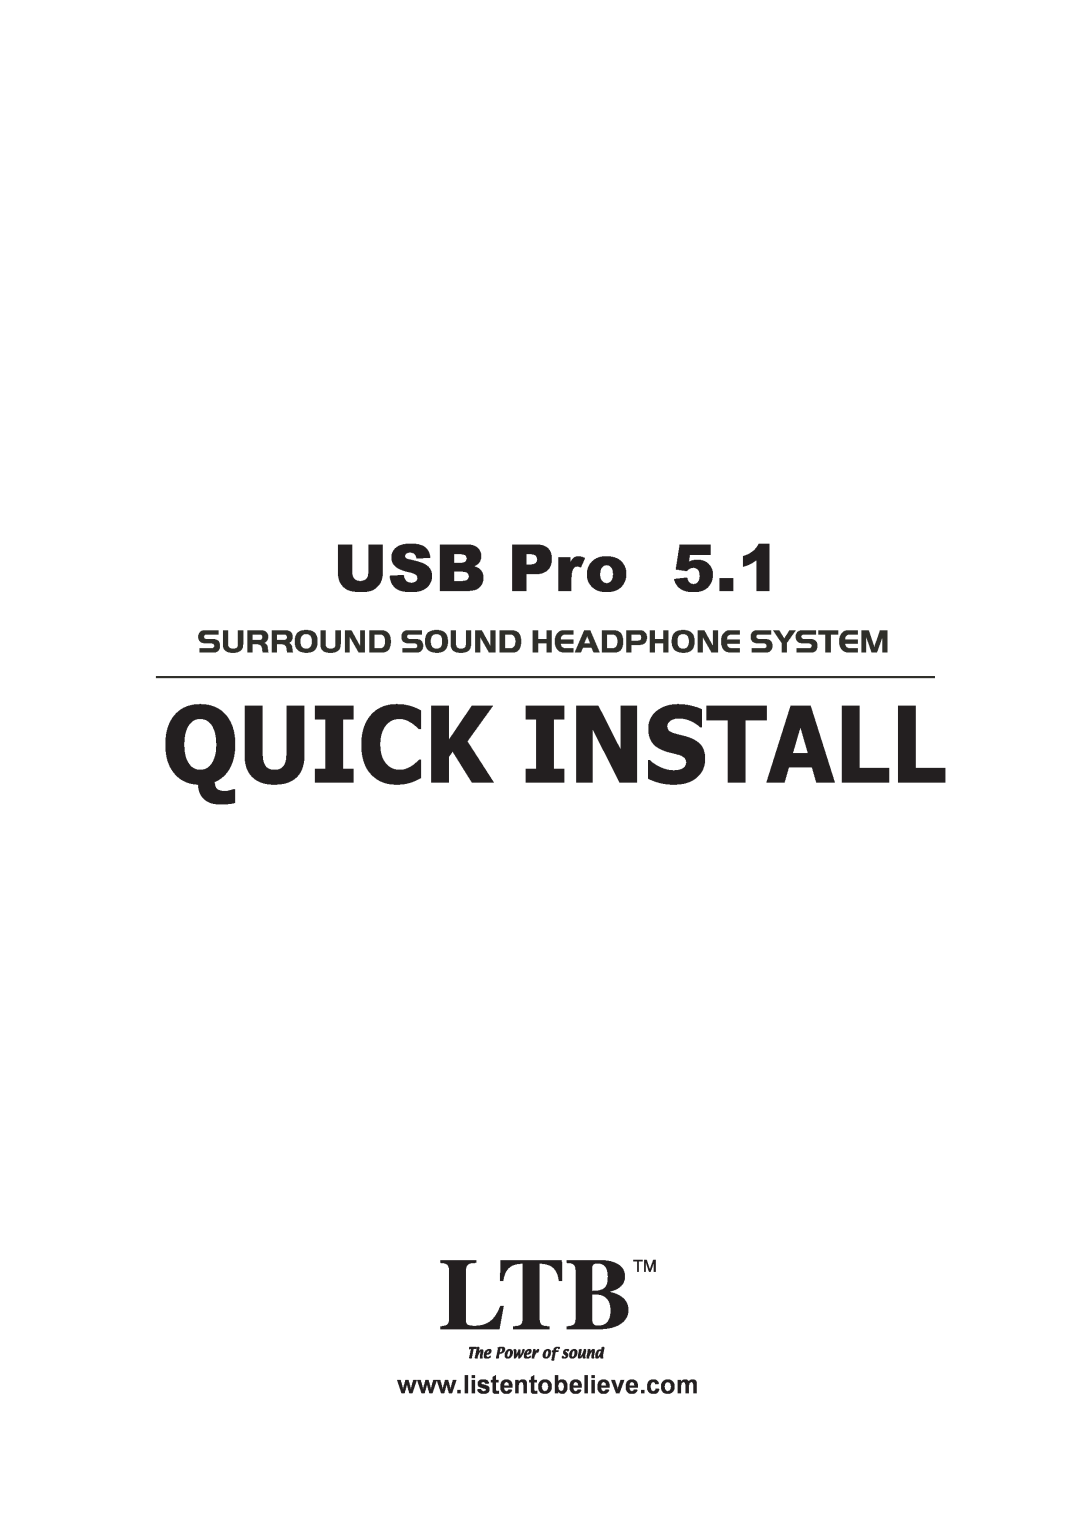 LTB Audio Systems 5.1 manual Quick Install, USB Pro 